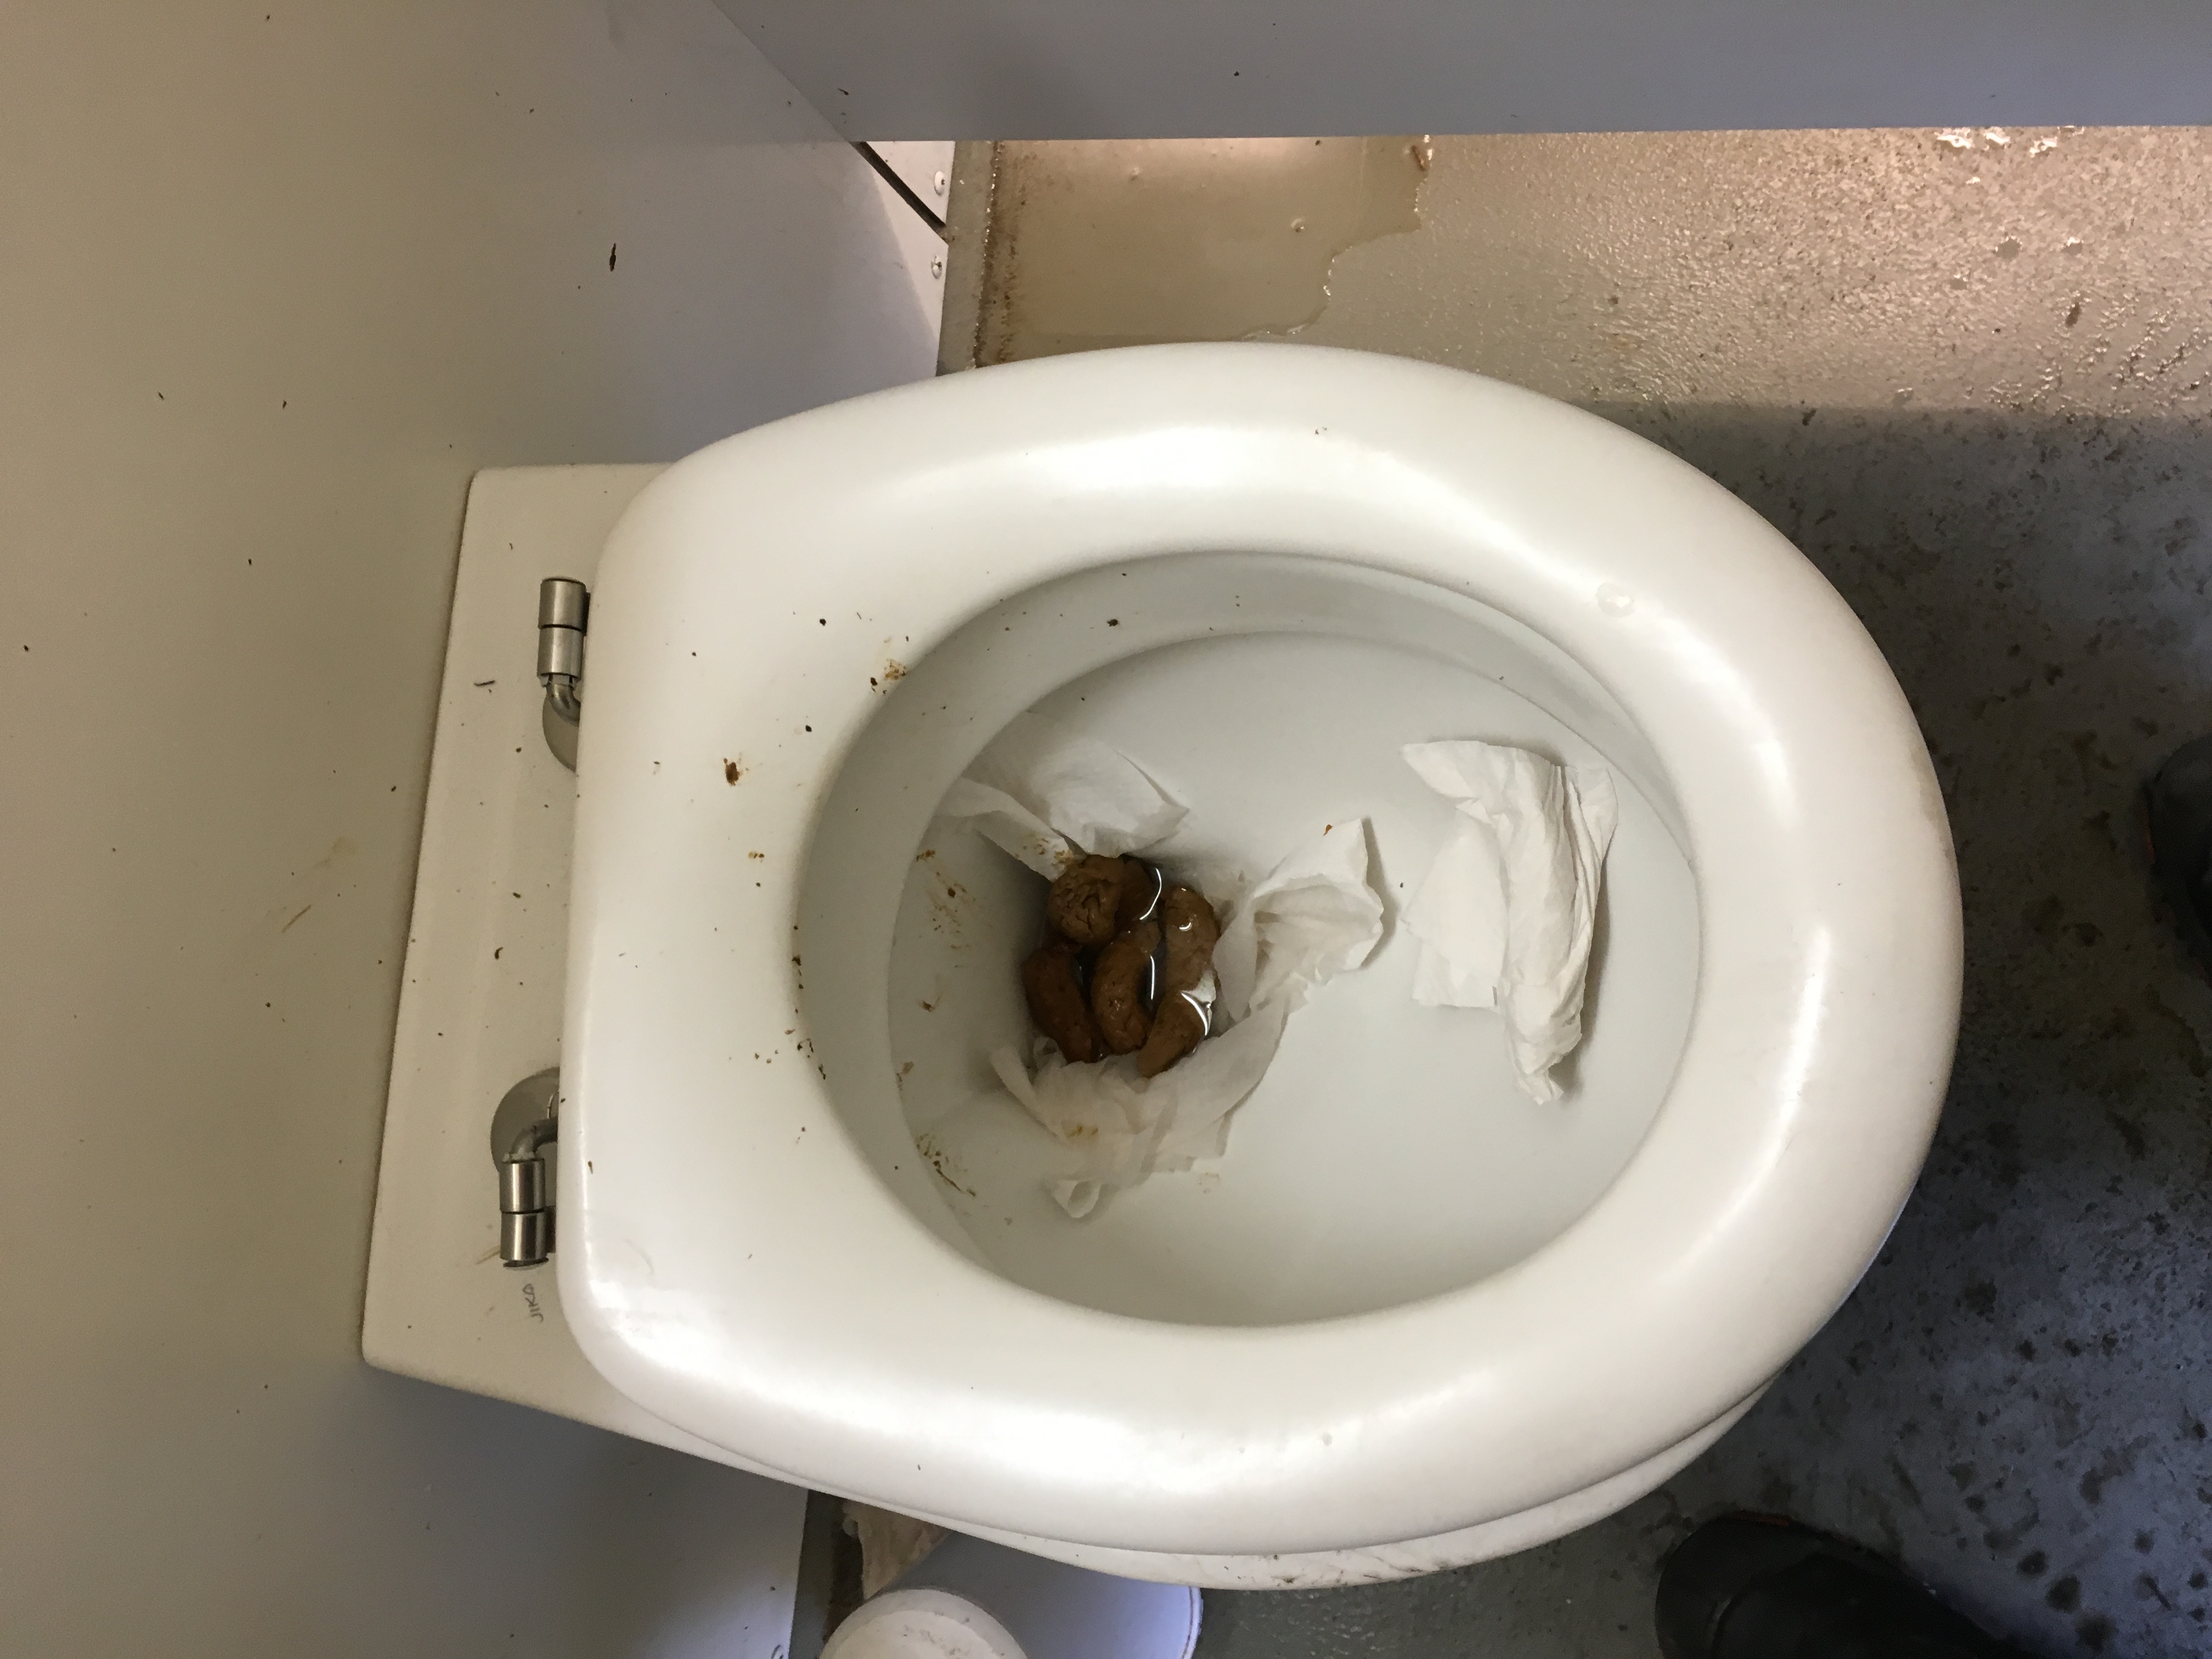 Morning shit on public toilet before work 09/29/2017